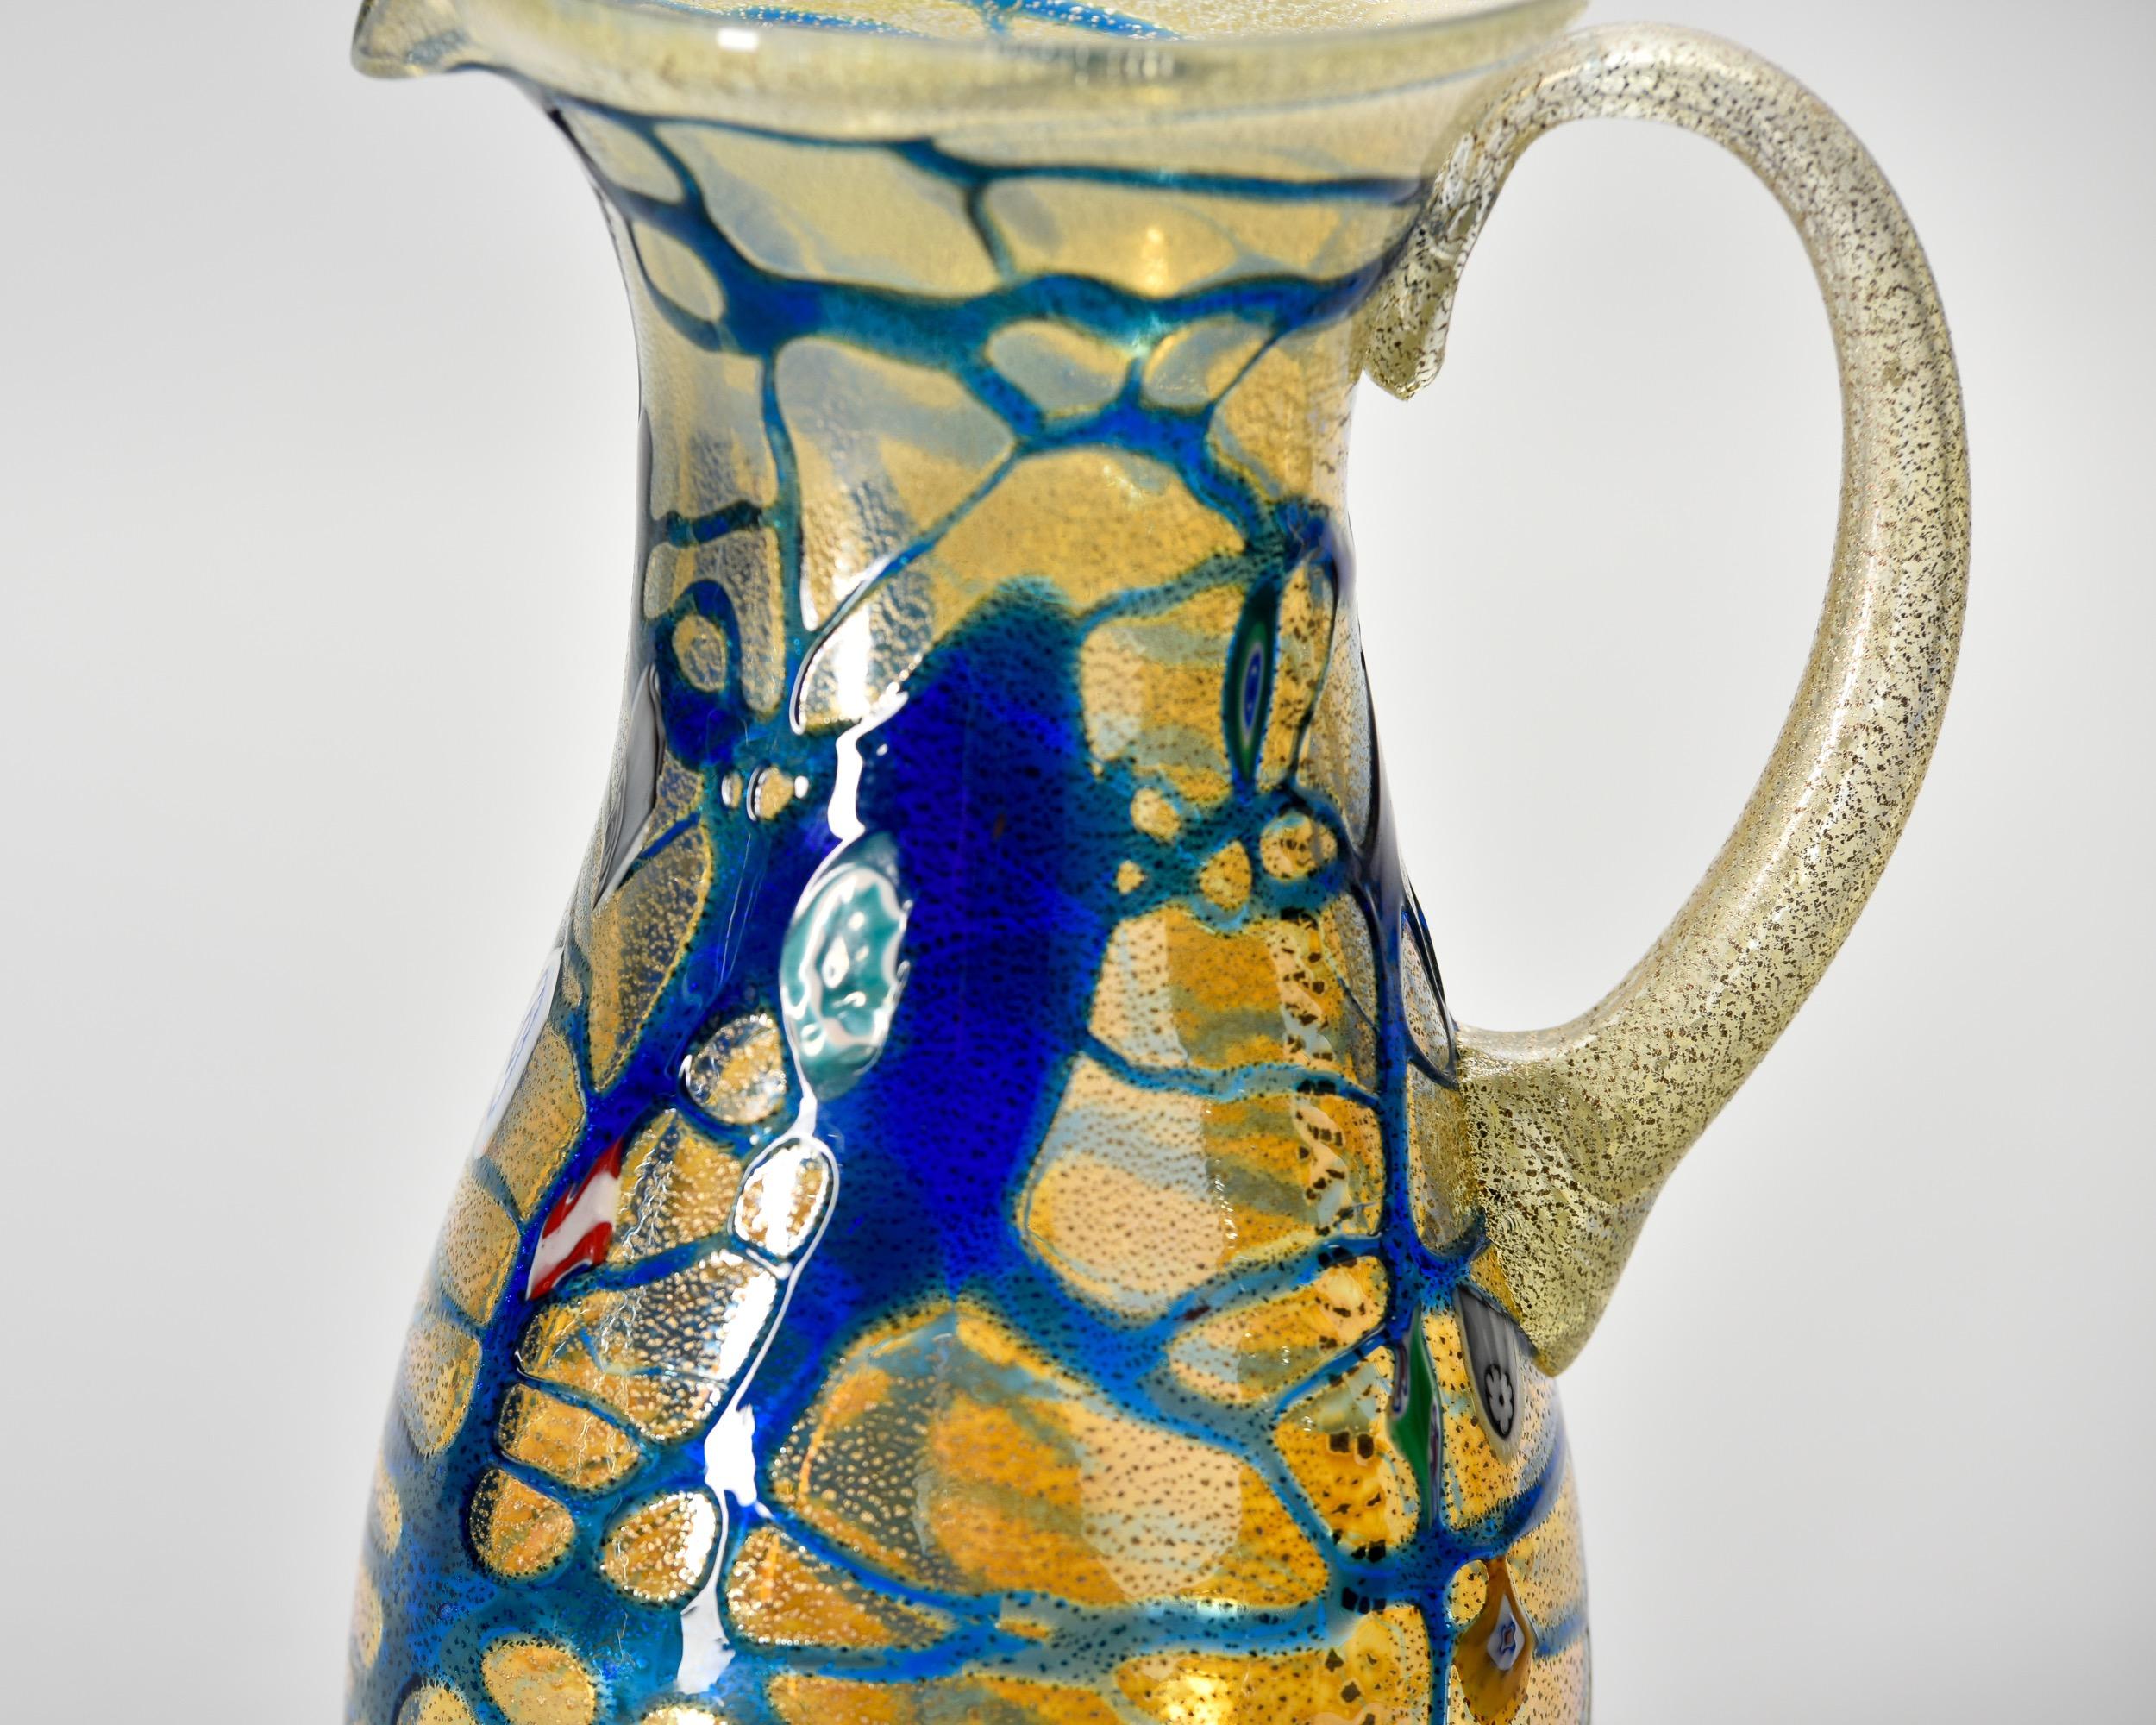 New Murano Glass Pitcher in Iridescent Gold with Blue Streaks For Sale 1